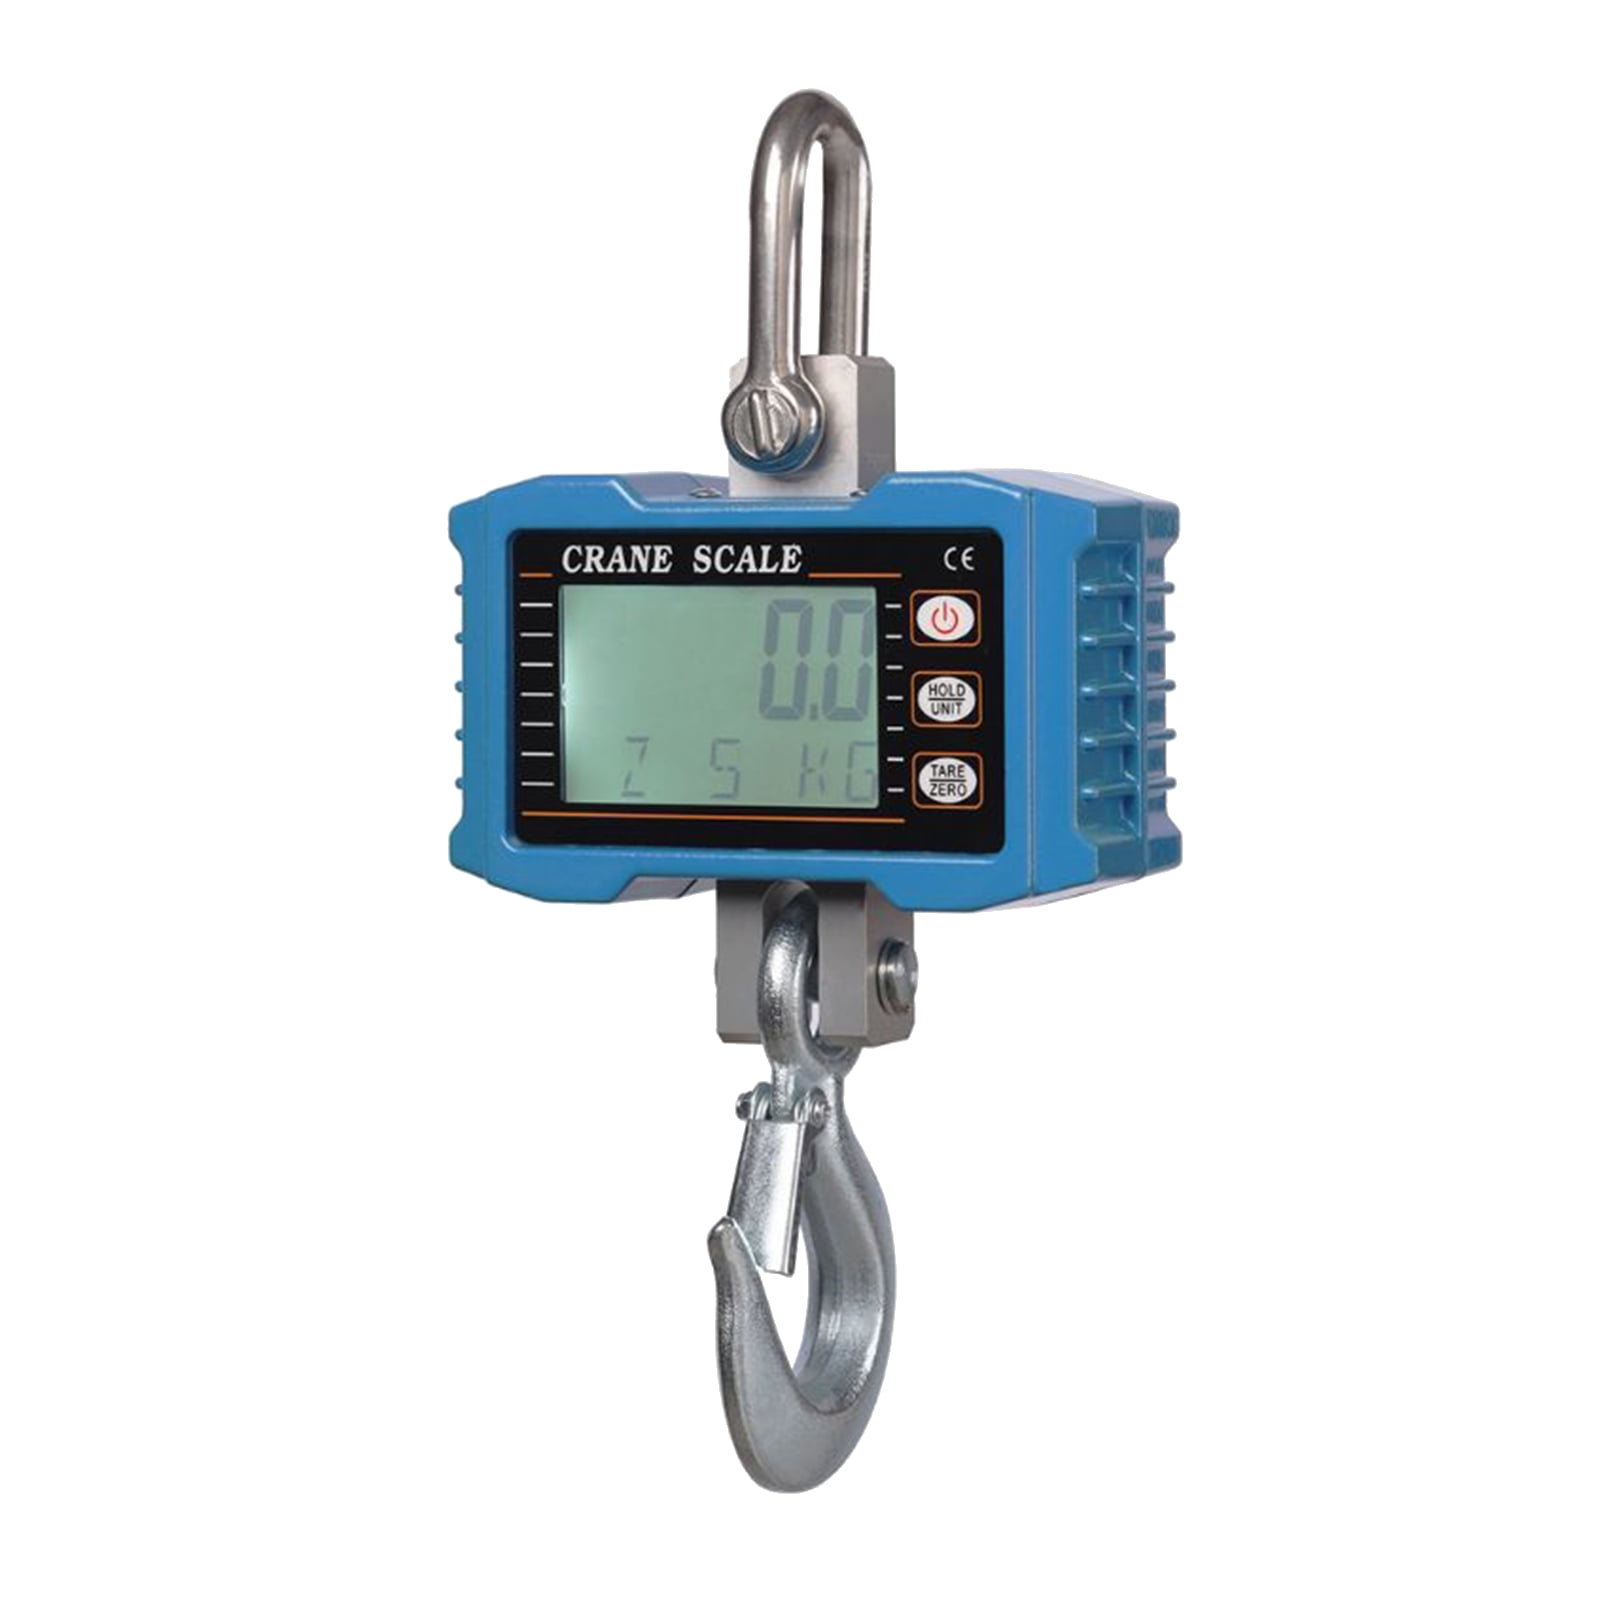 Digital Hanging Scale, 1000Kg Electronic Digital Crane Scale with Backlight  LCD Display and Rechargeable Battery, High Accuracy Industrial Weighing